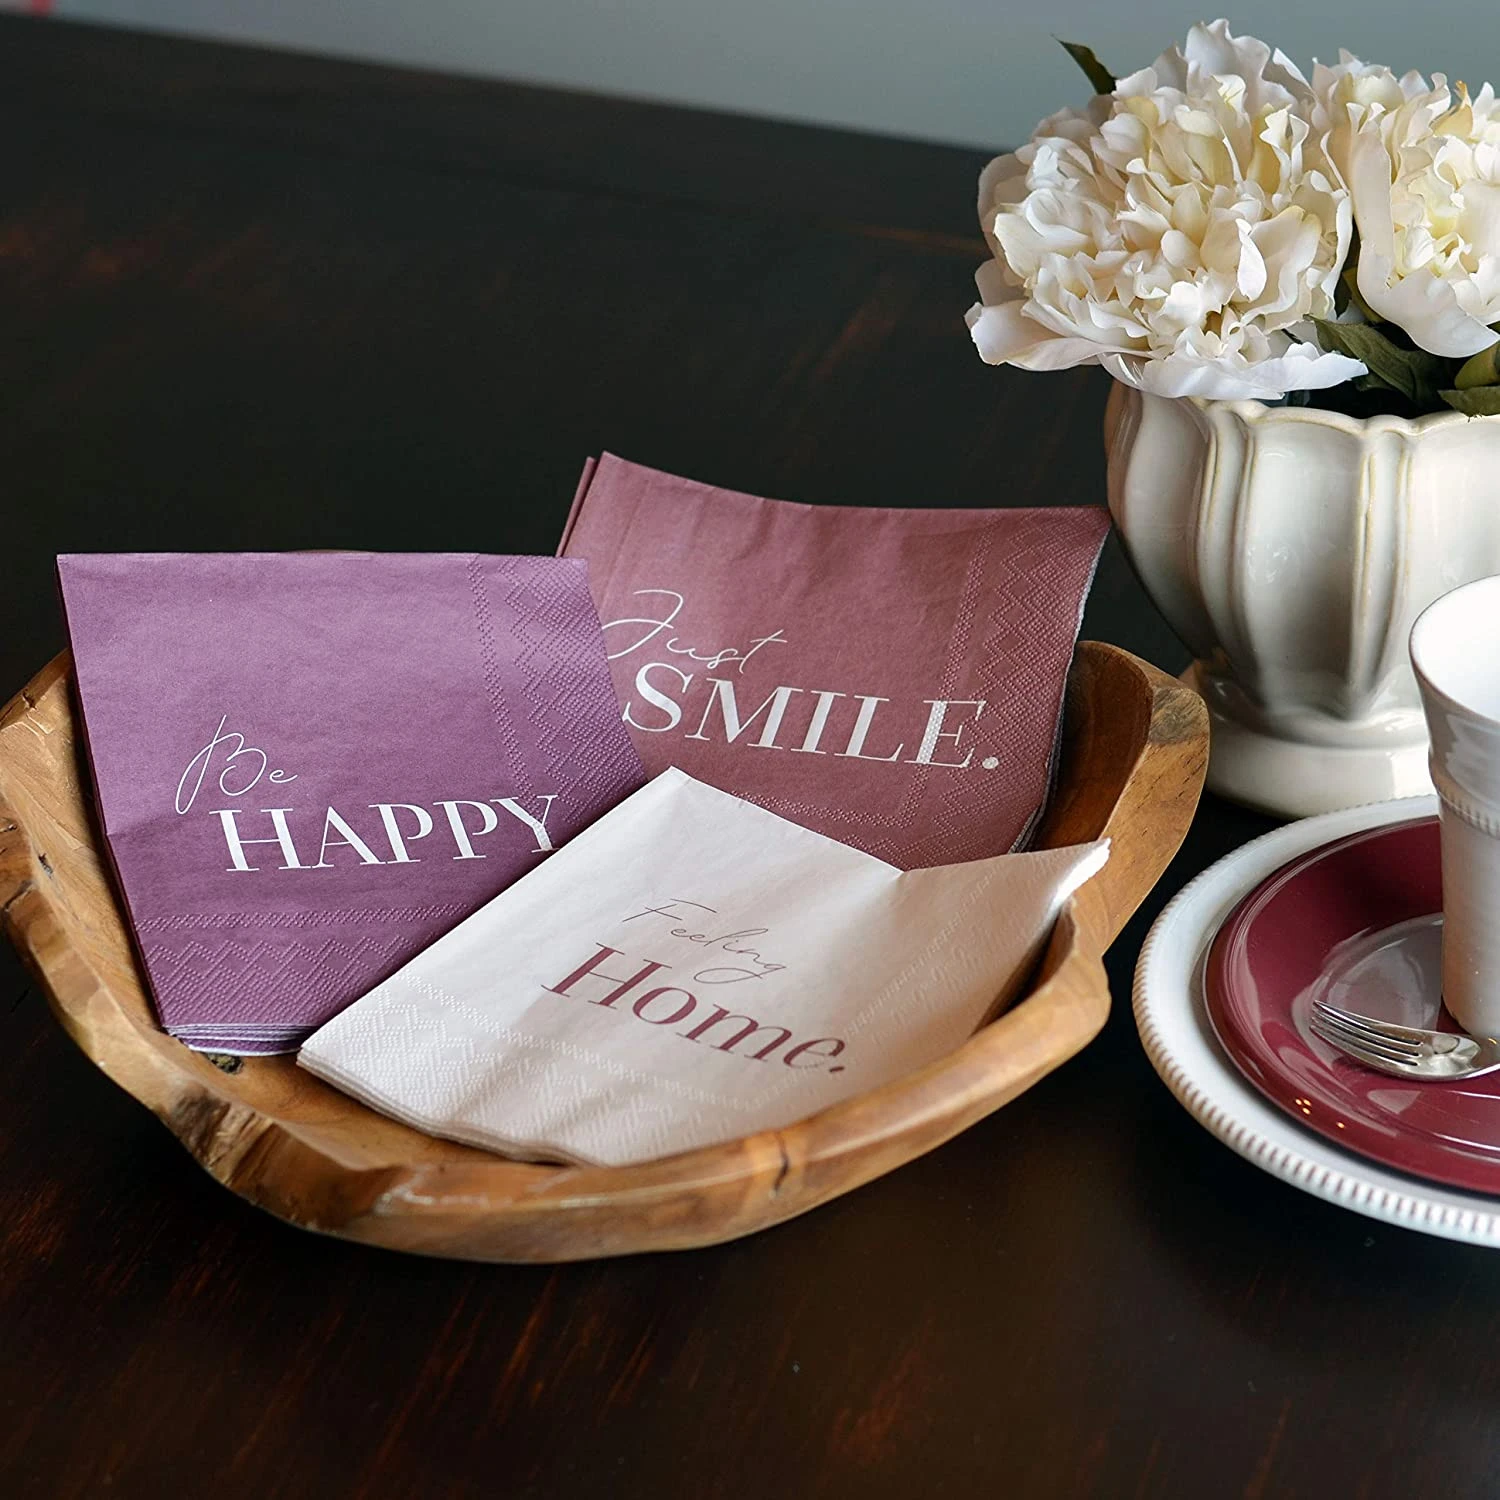 Happy, Smile, and Home Word Art Restaurant Paper Napkin Set, Luncheon Napkin For Celebration Party Favor Supplies